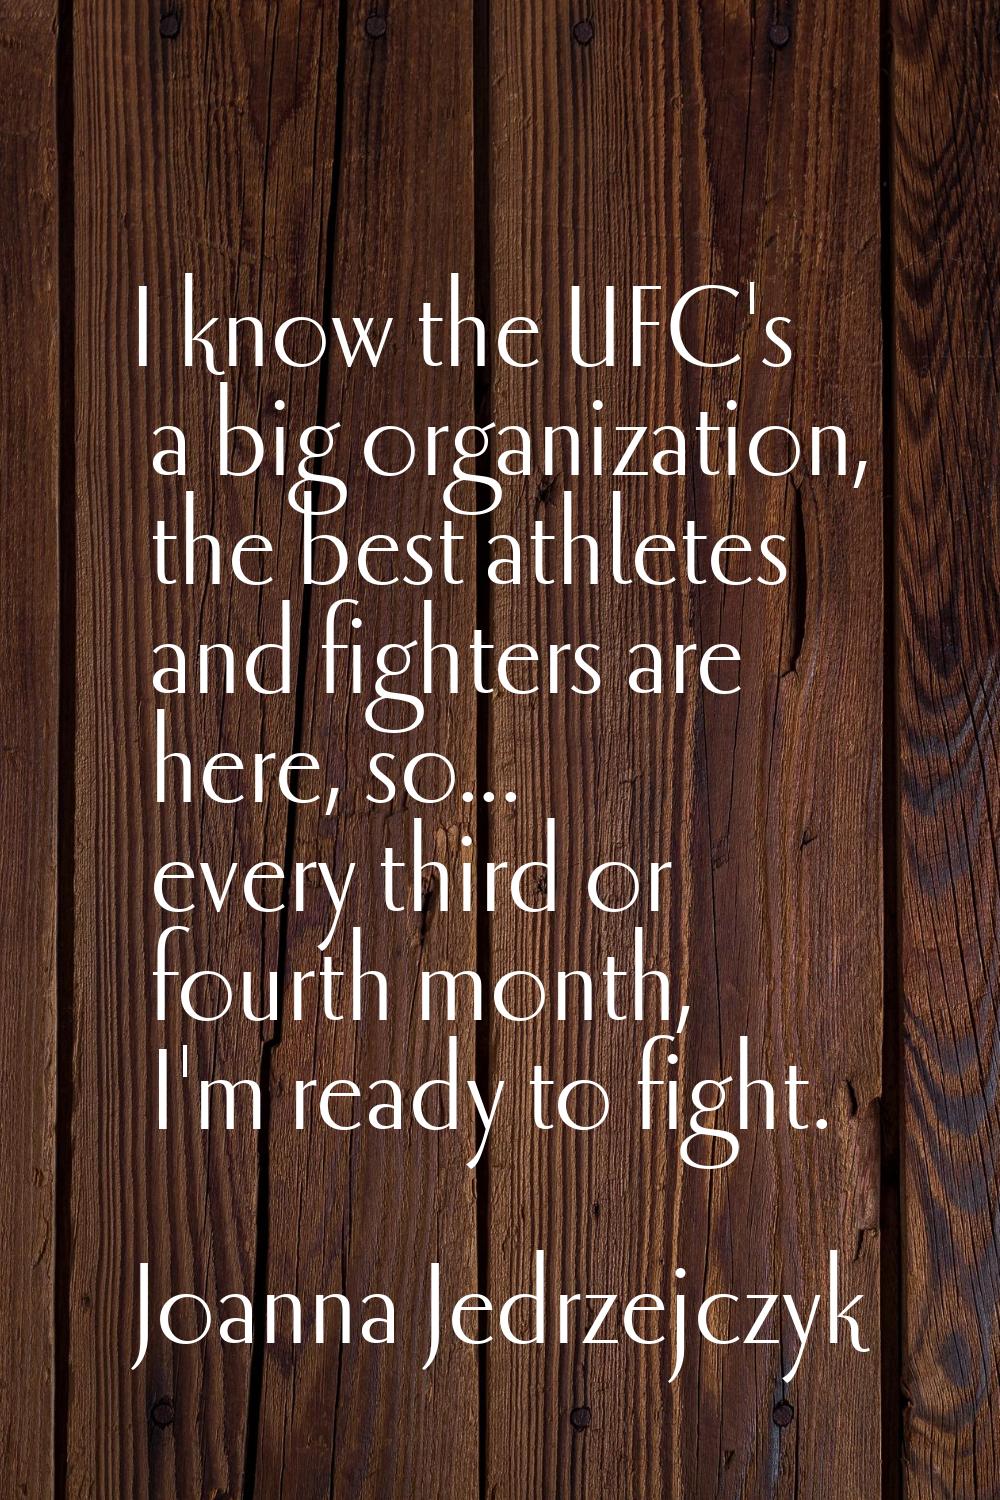 I know the UFC's a big organization, the best athletes and fighters are here, so... every third or 